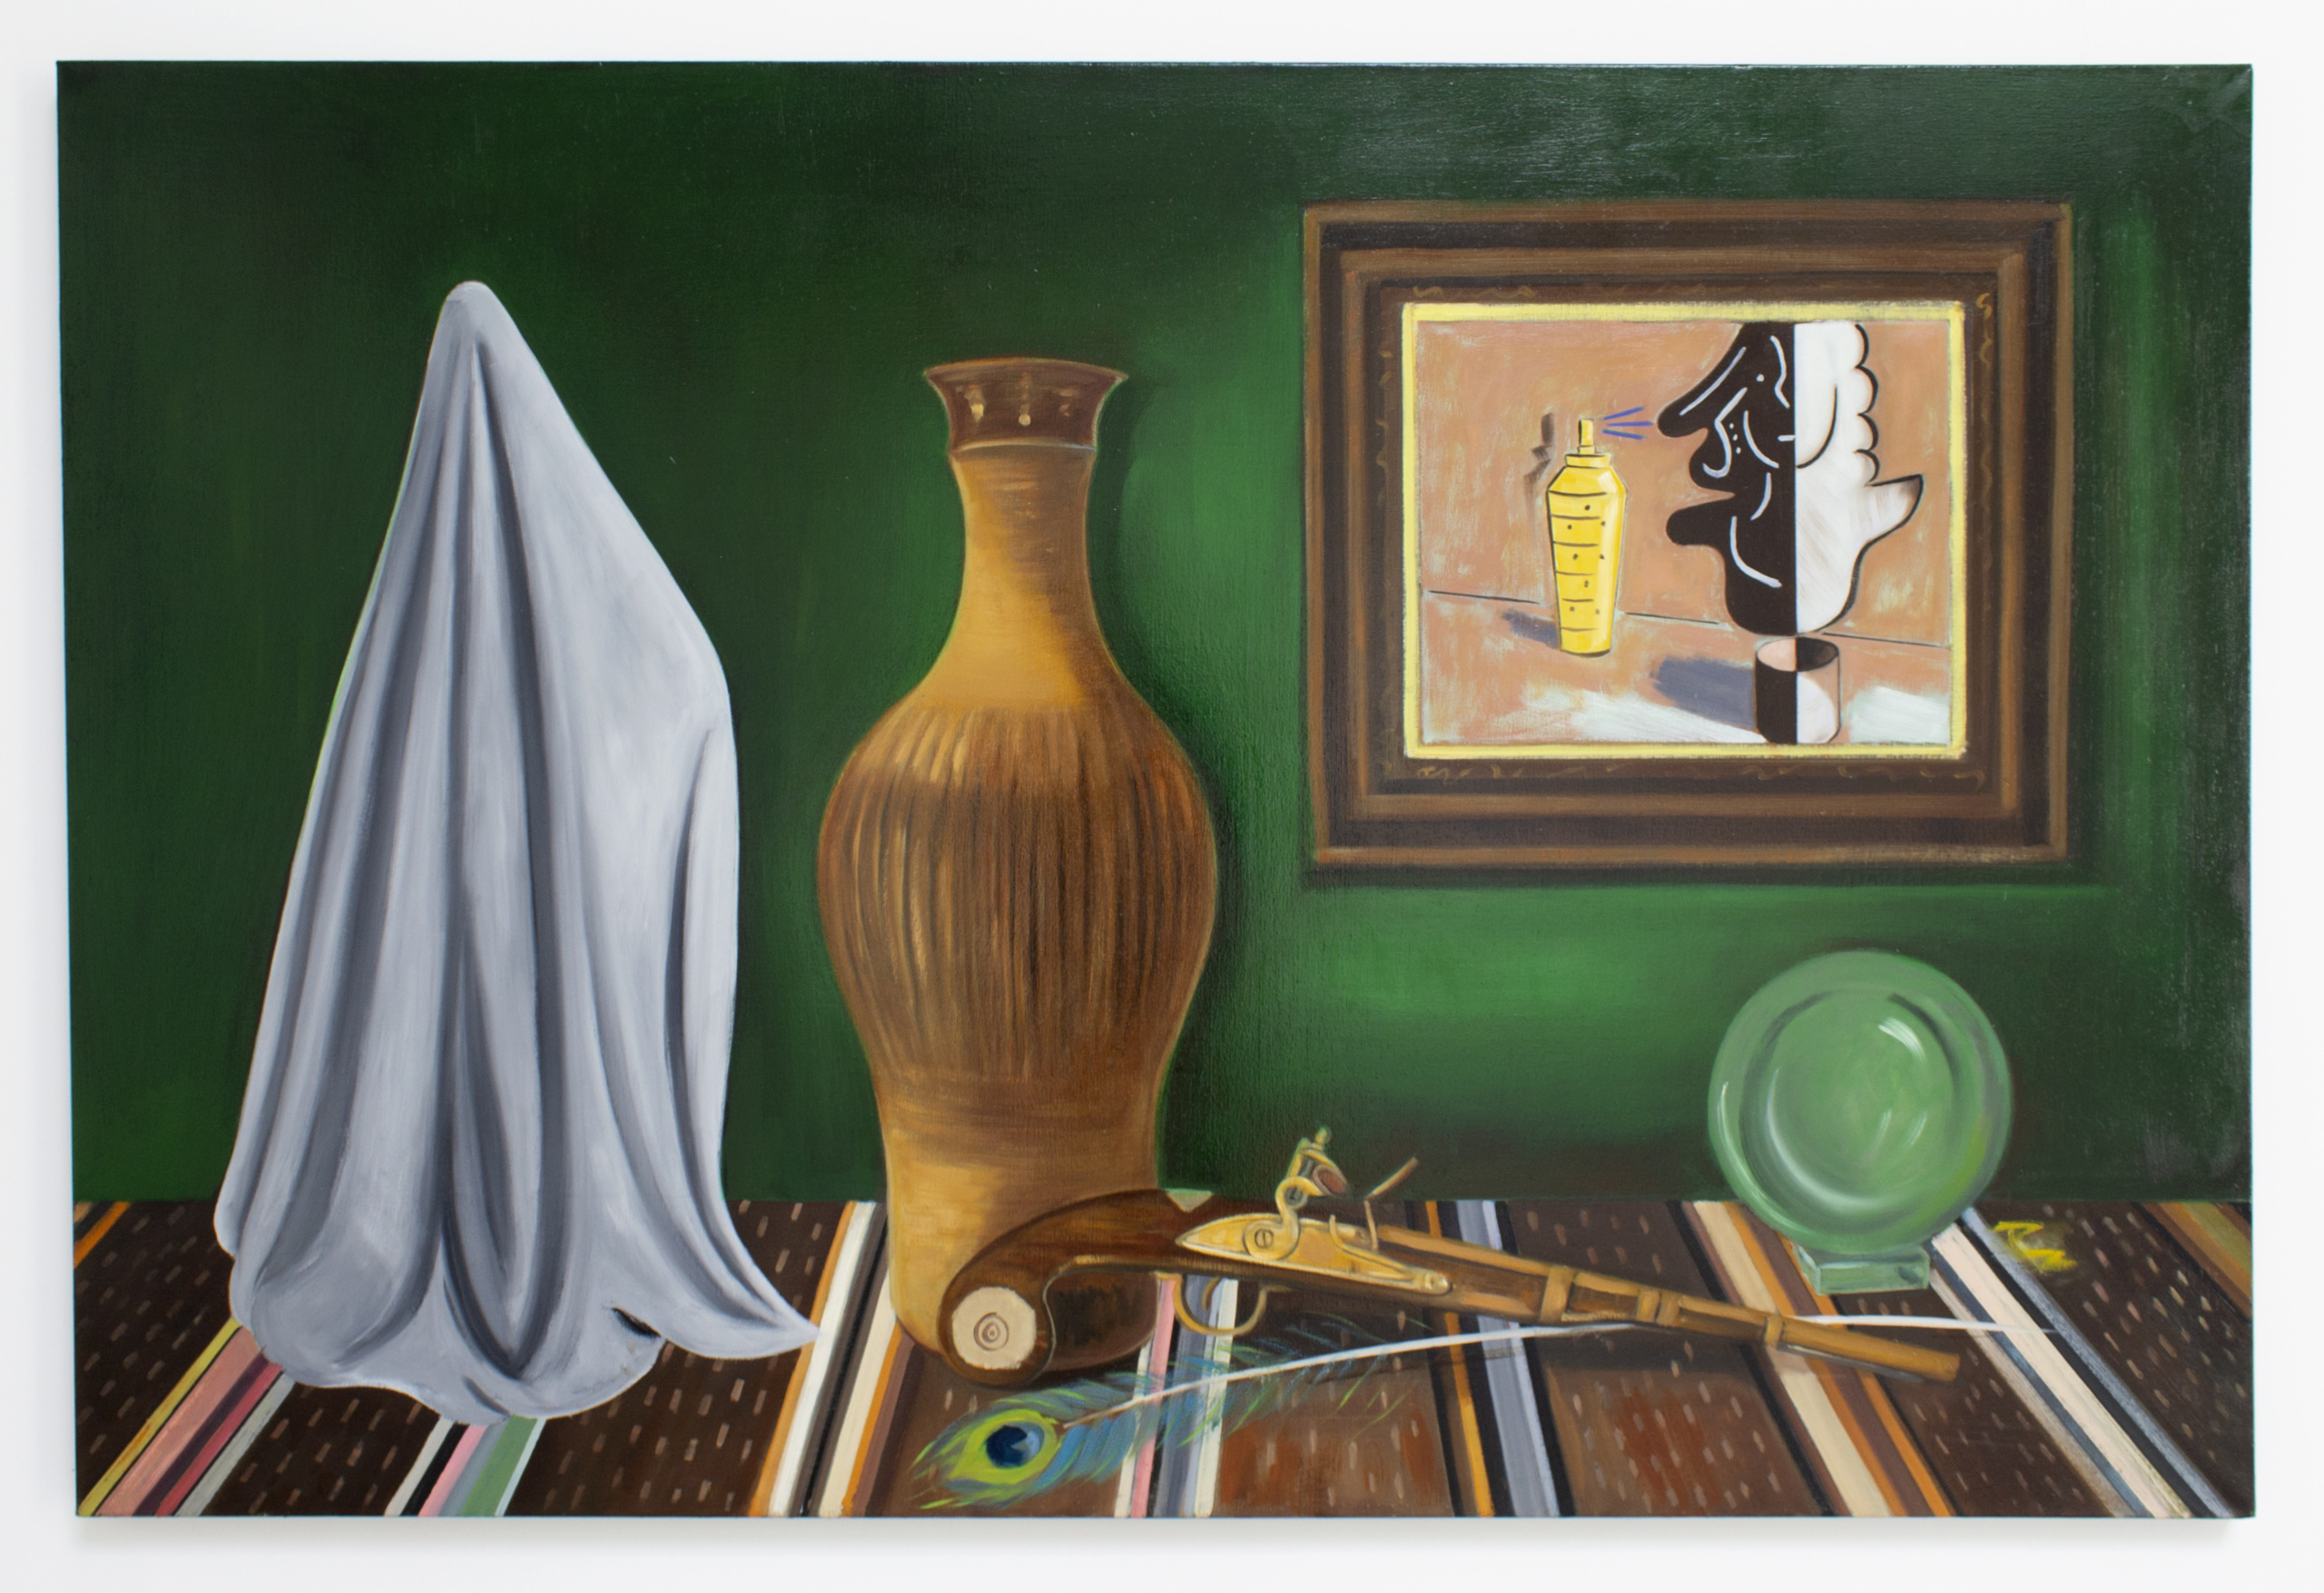 Raul Guerrero, Still Life with Sarape and Crystal Ball, 2012, on view at Marc Selwyn Fine Art in Los Angeles.